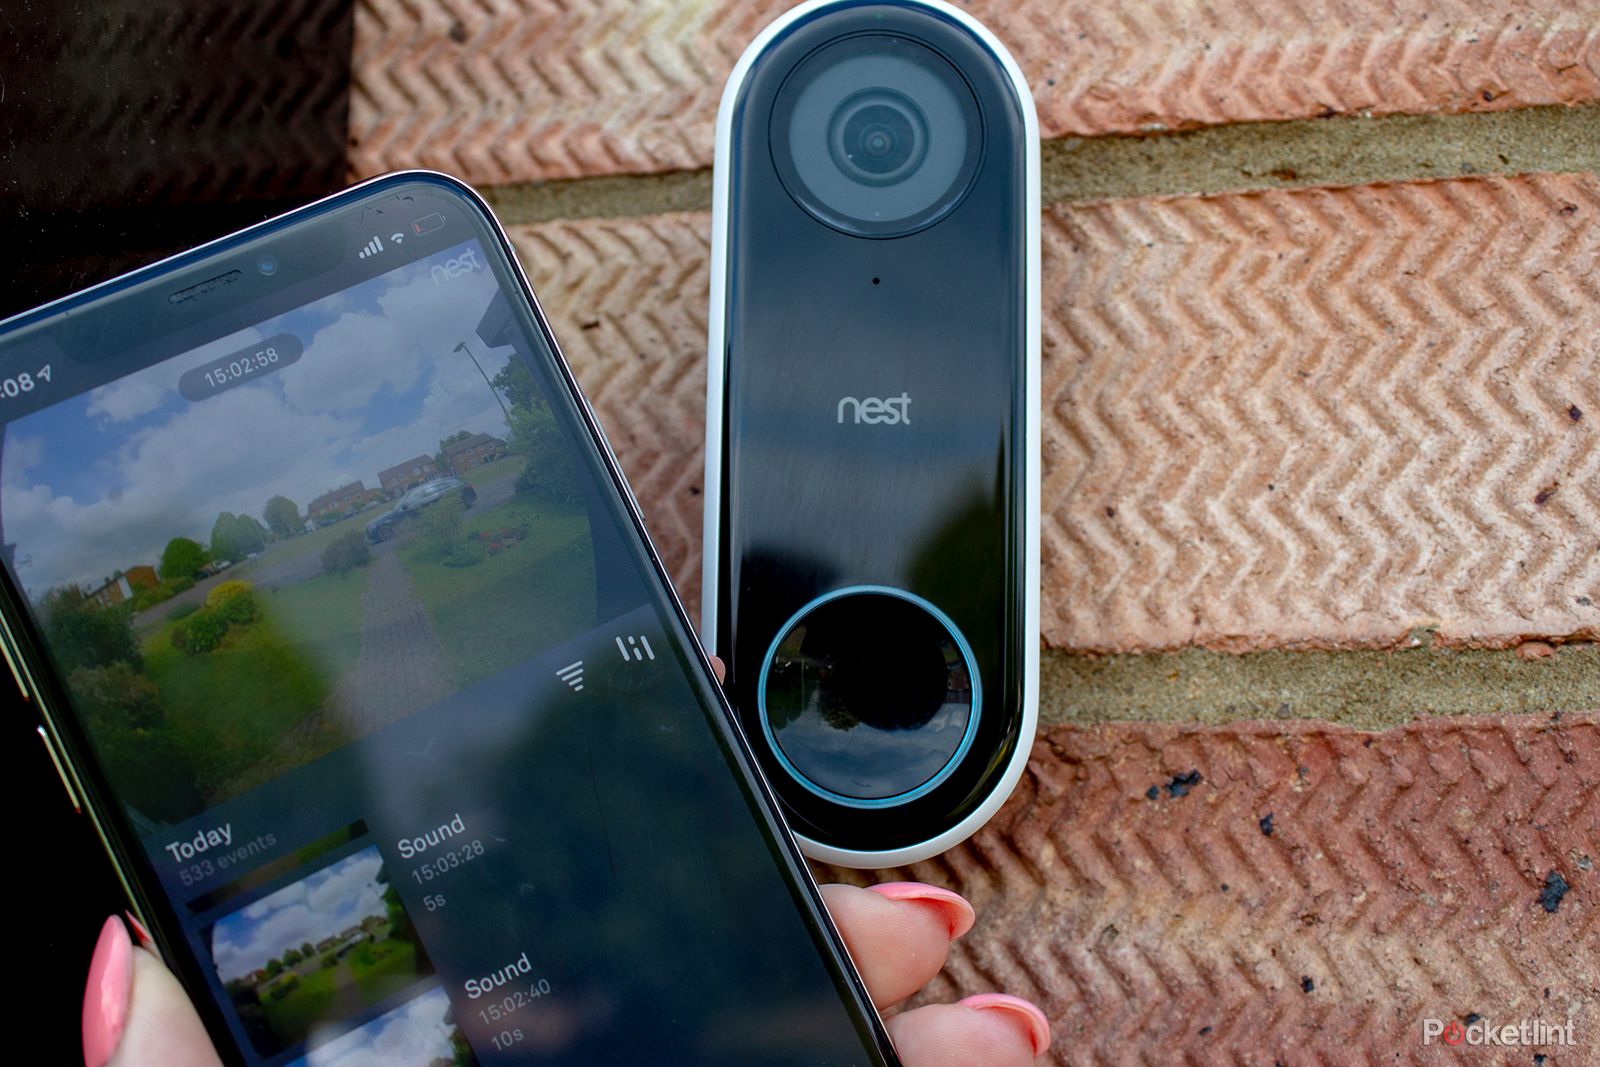 Ring Video Doorbell tips and tricks